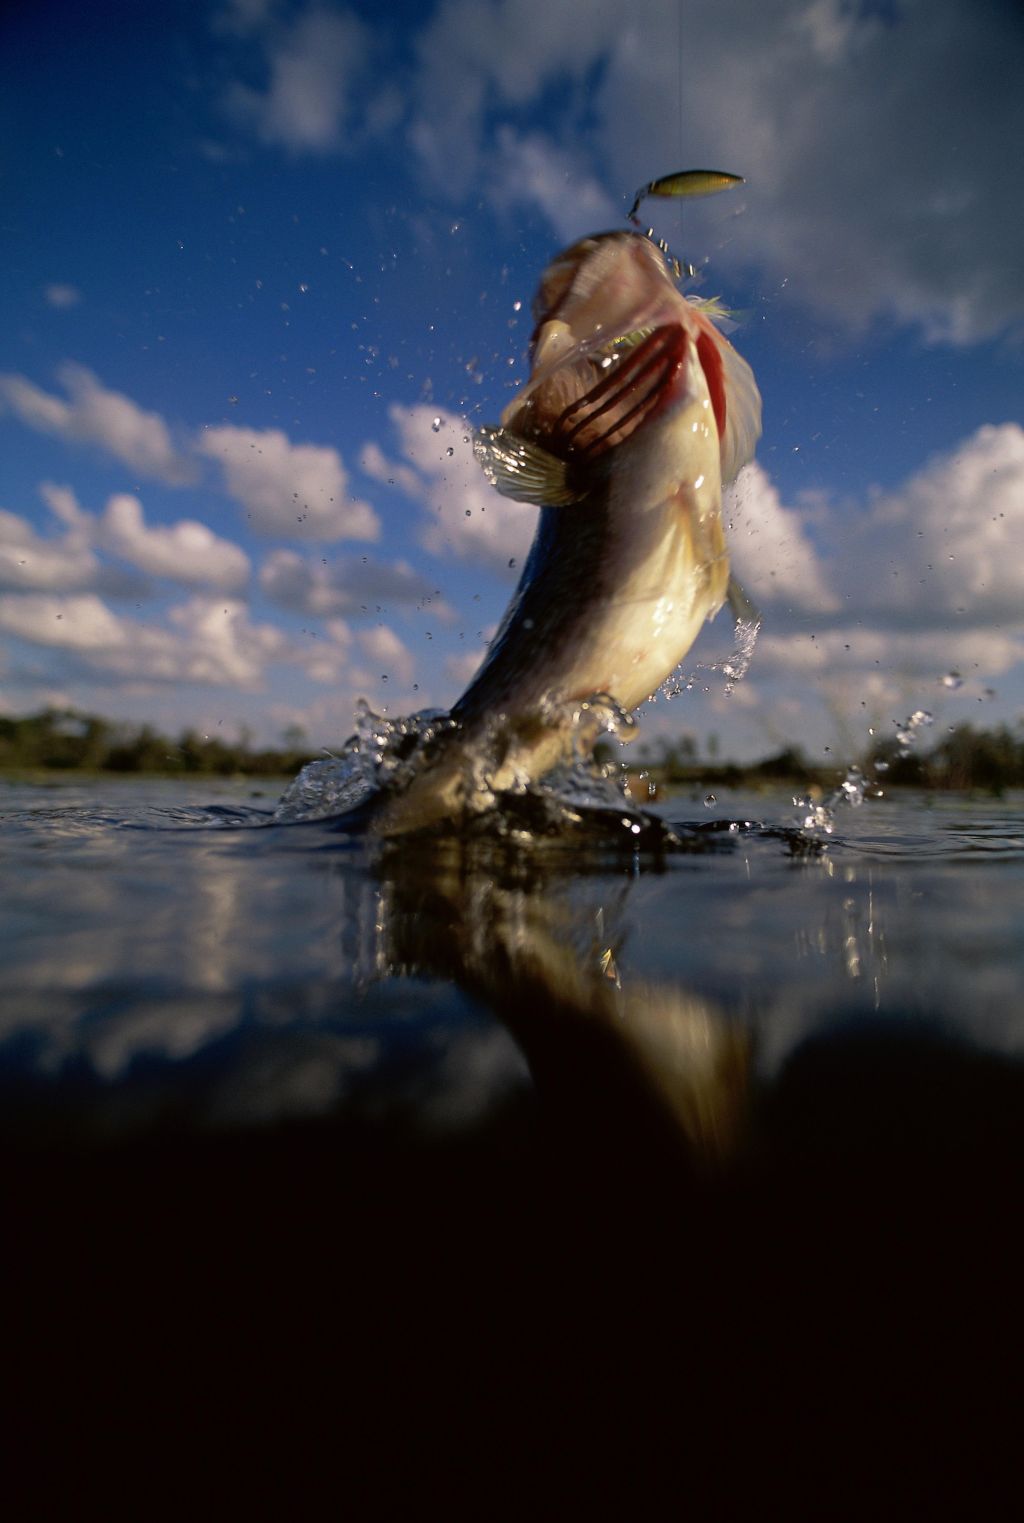 Fish jumping out of water